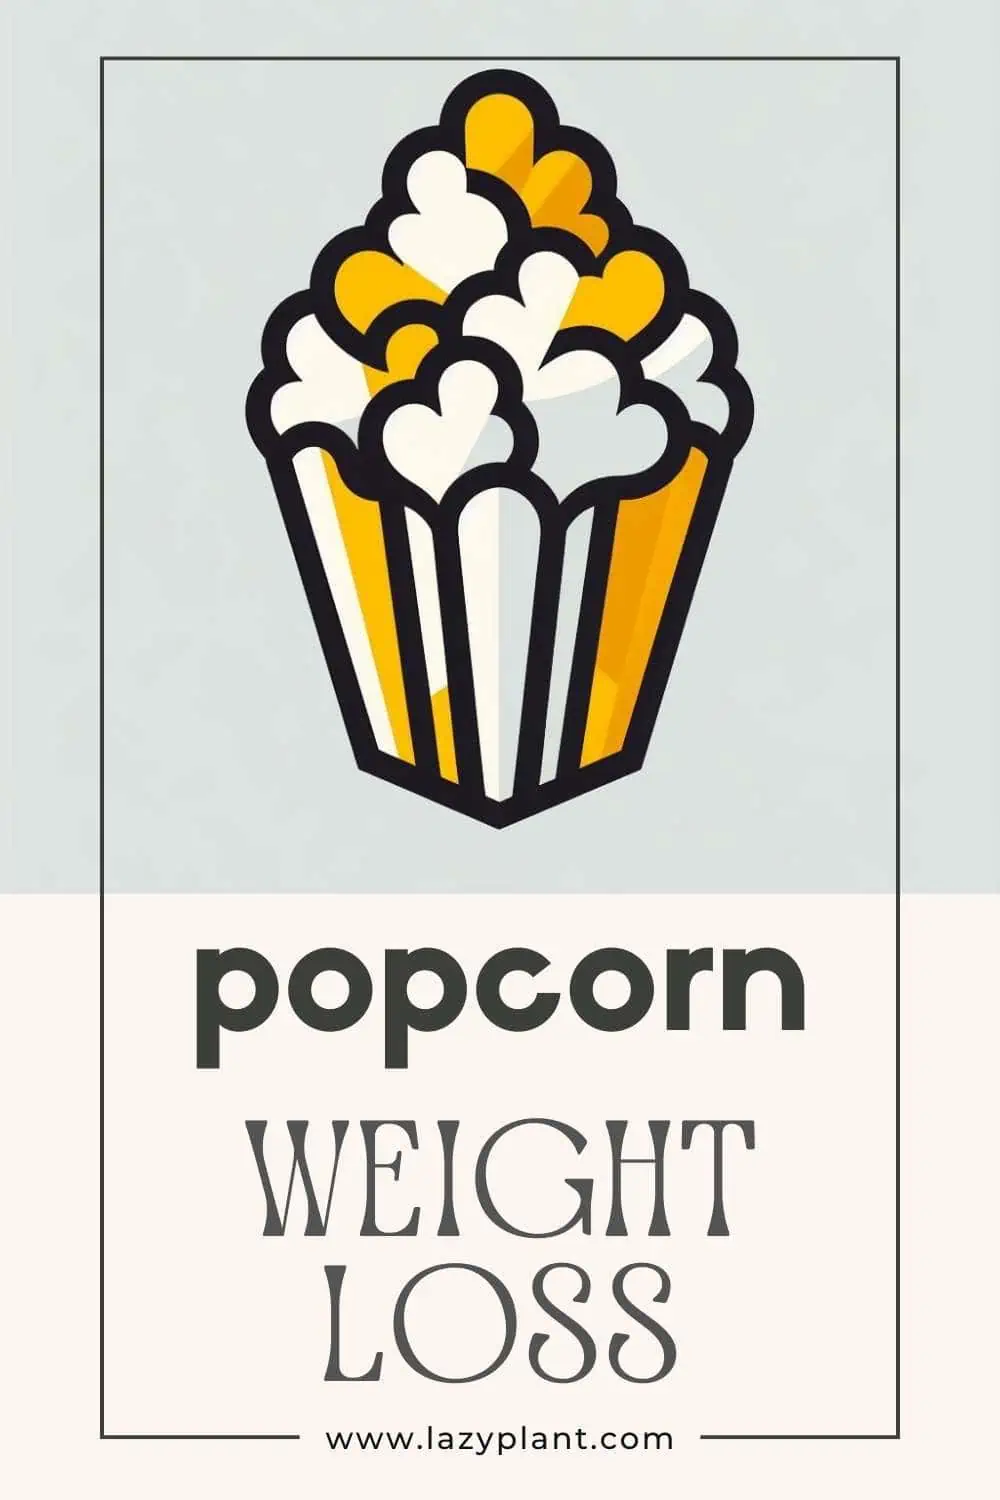 Popcorn doesn't make you Fat.